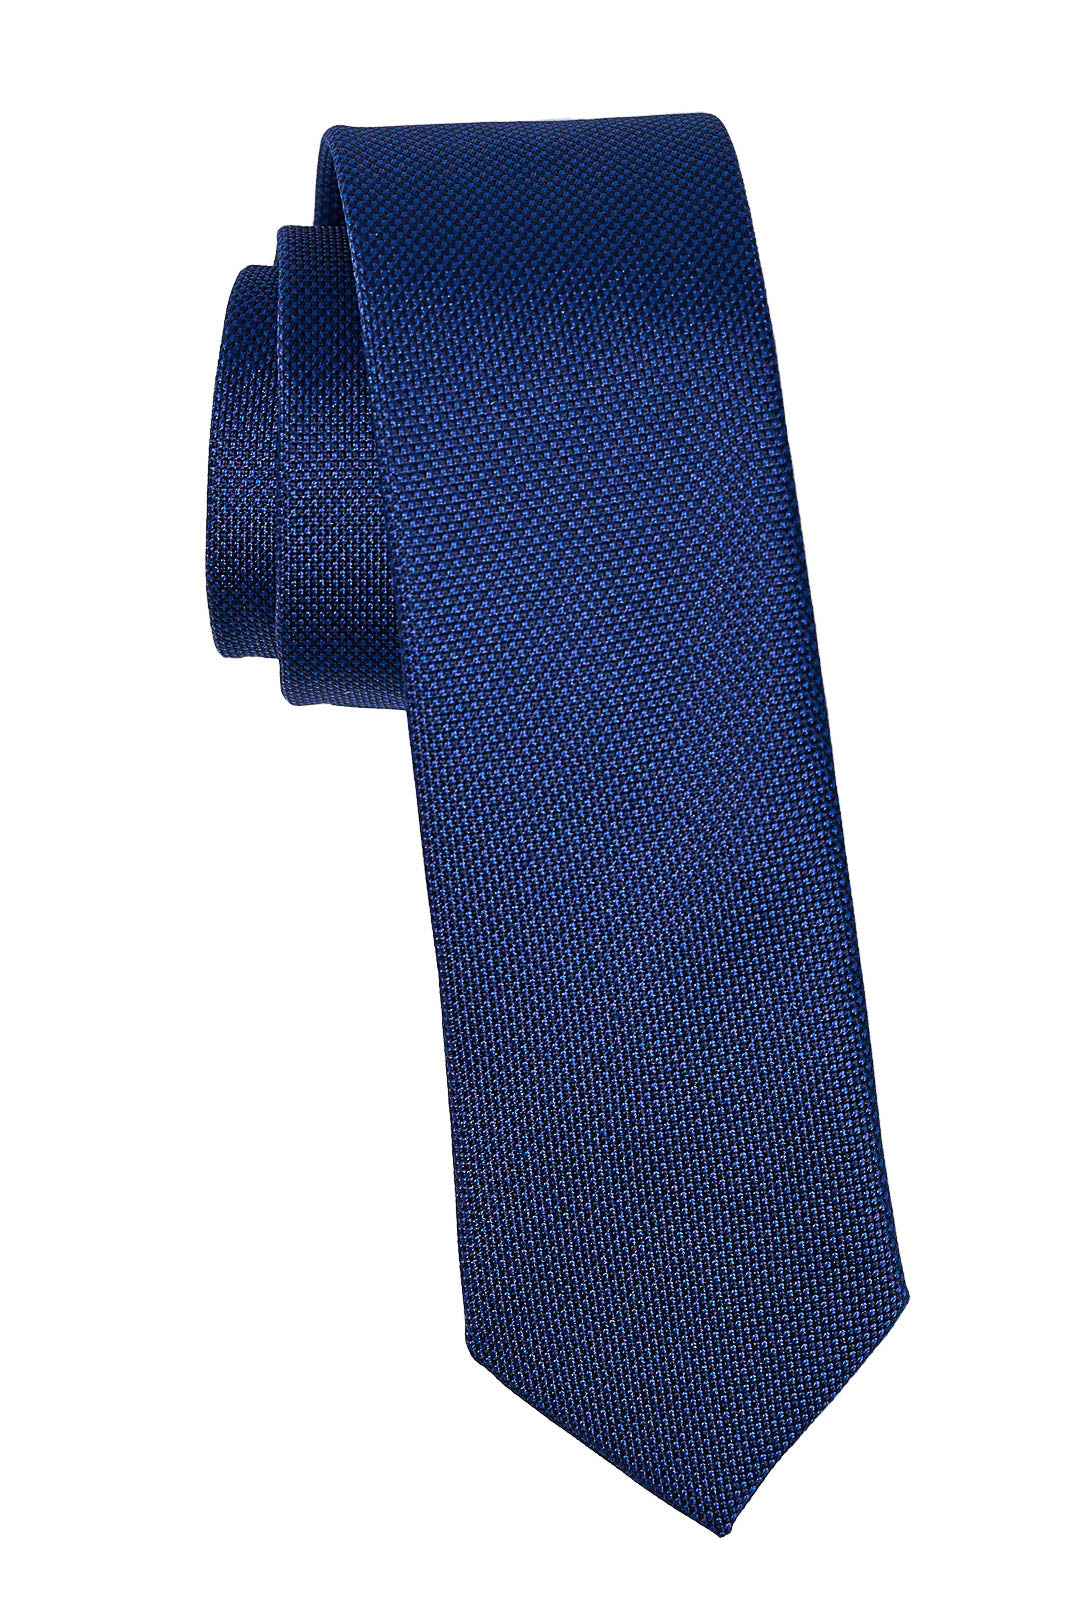 Embroidered Electric Blue Tie